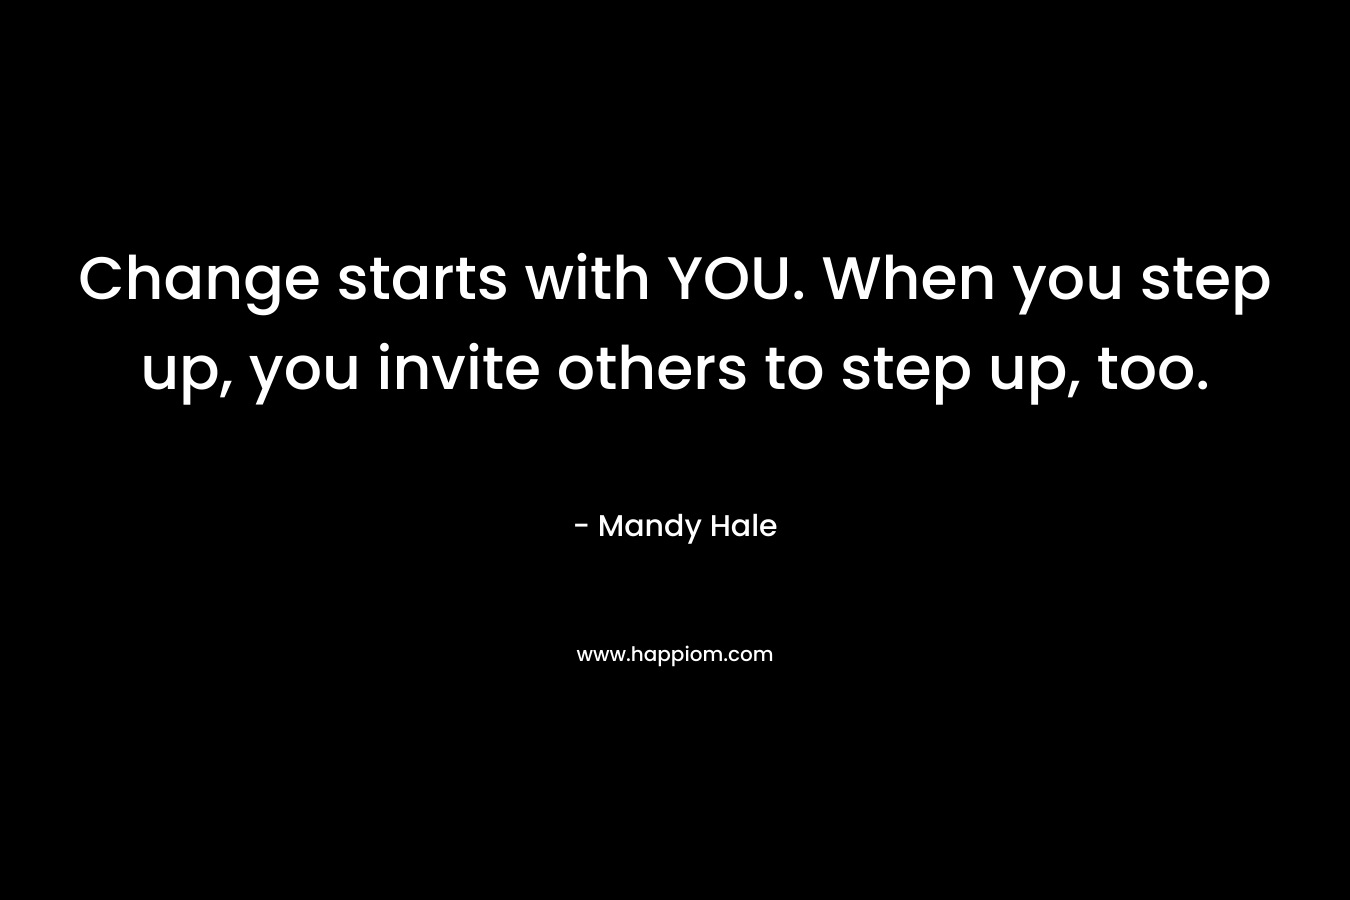 Change starts with YOU. When you step up, you invite others to step up, too.